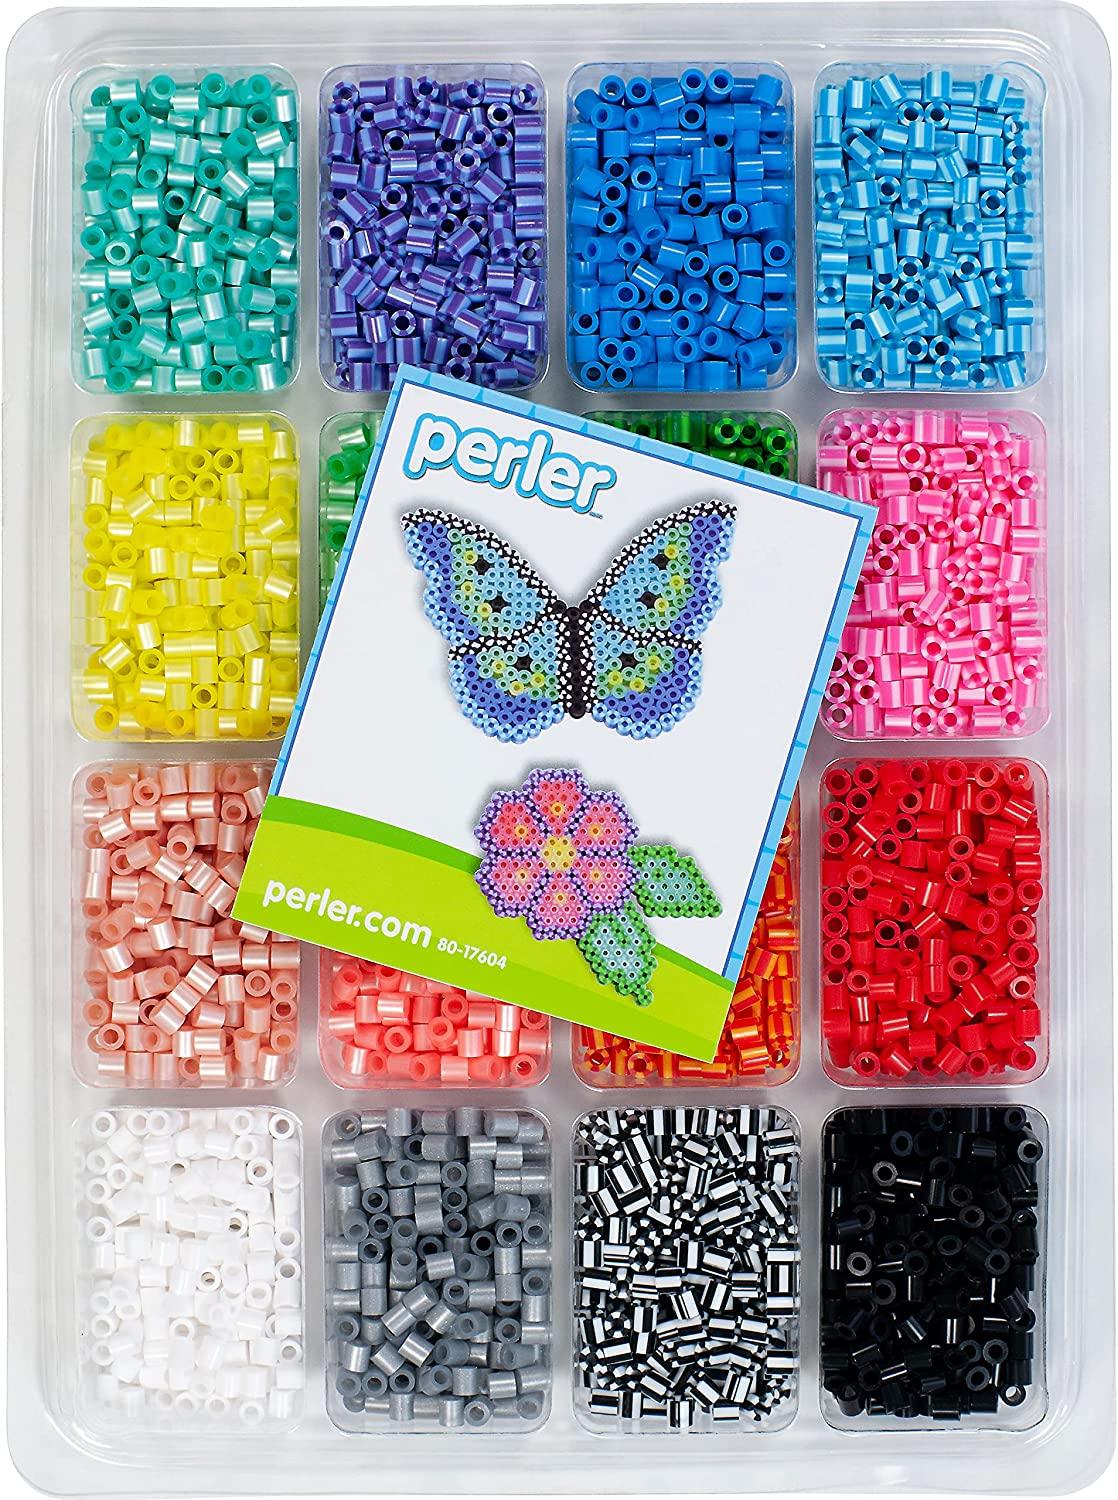 Perler Beads Assorted Fuse Beads Tray for Kids Crafts with Perler Bead  Pattern Book, 4001 pcs